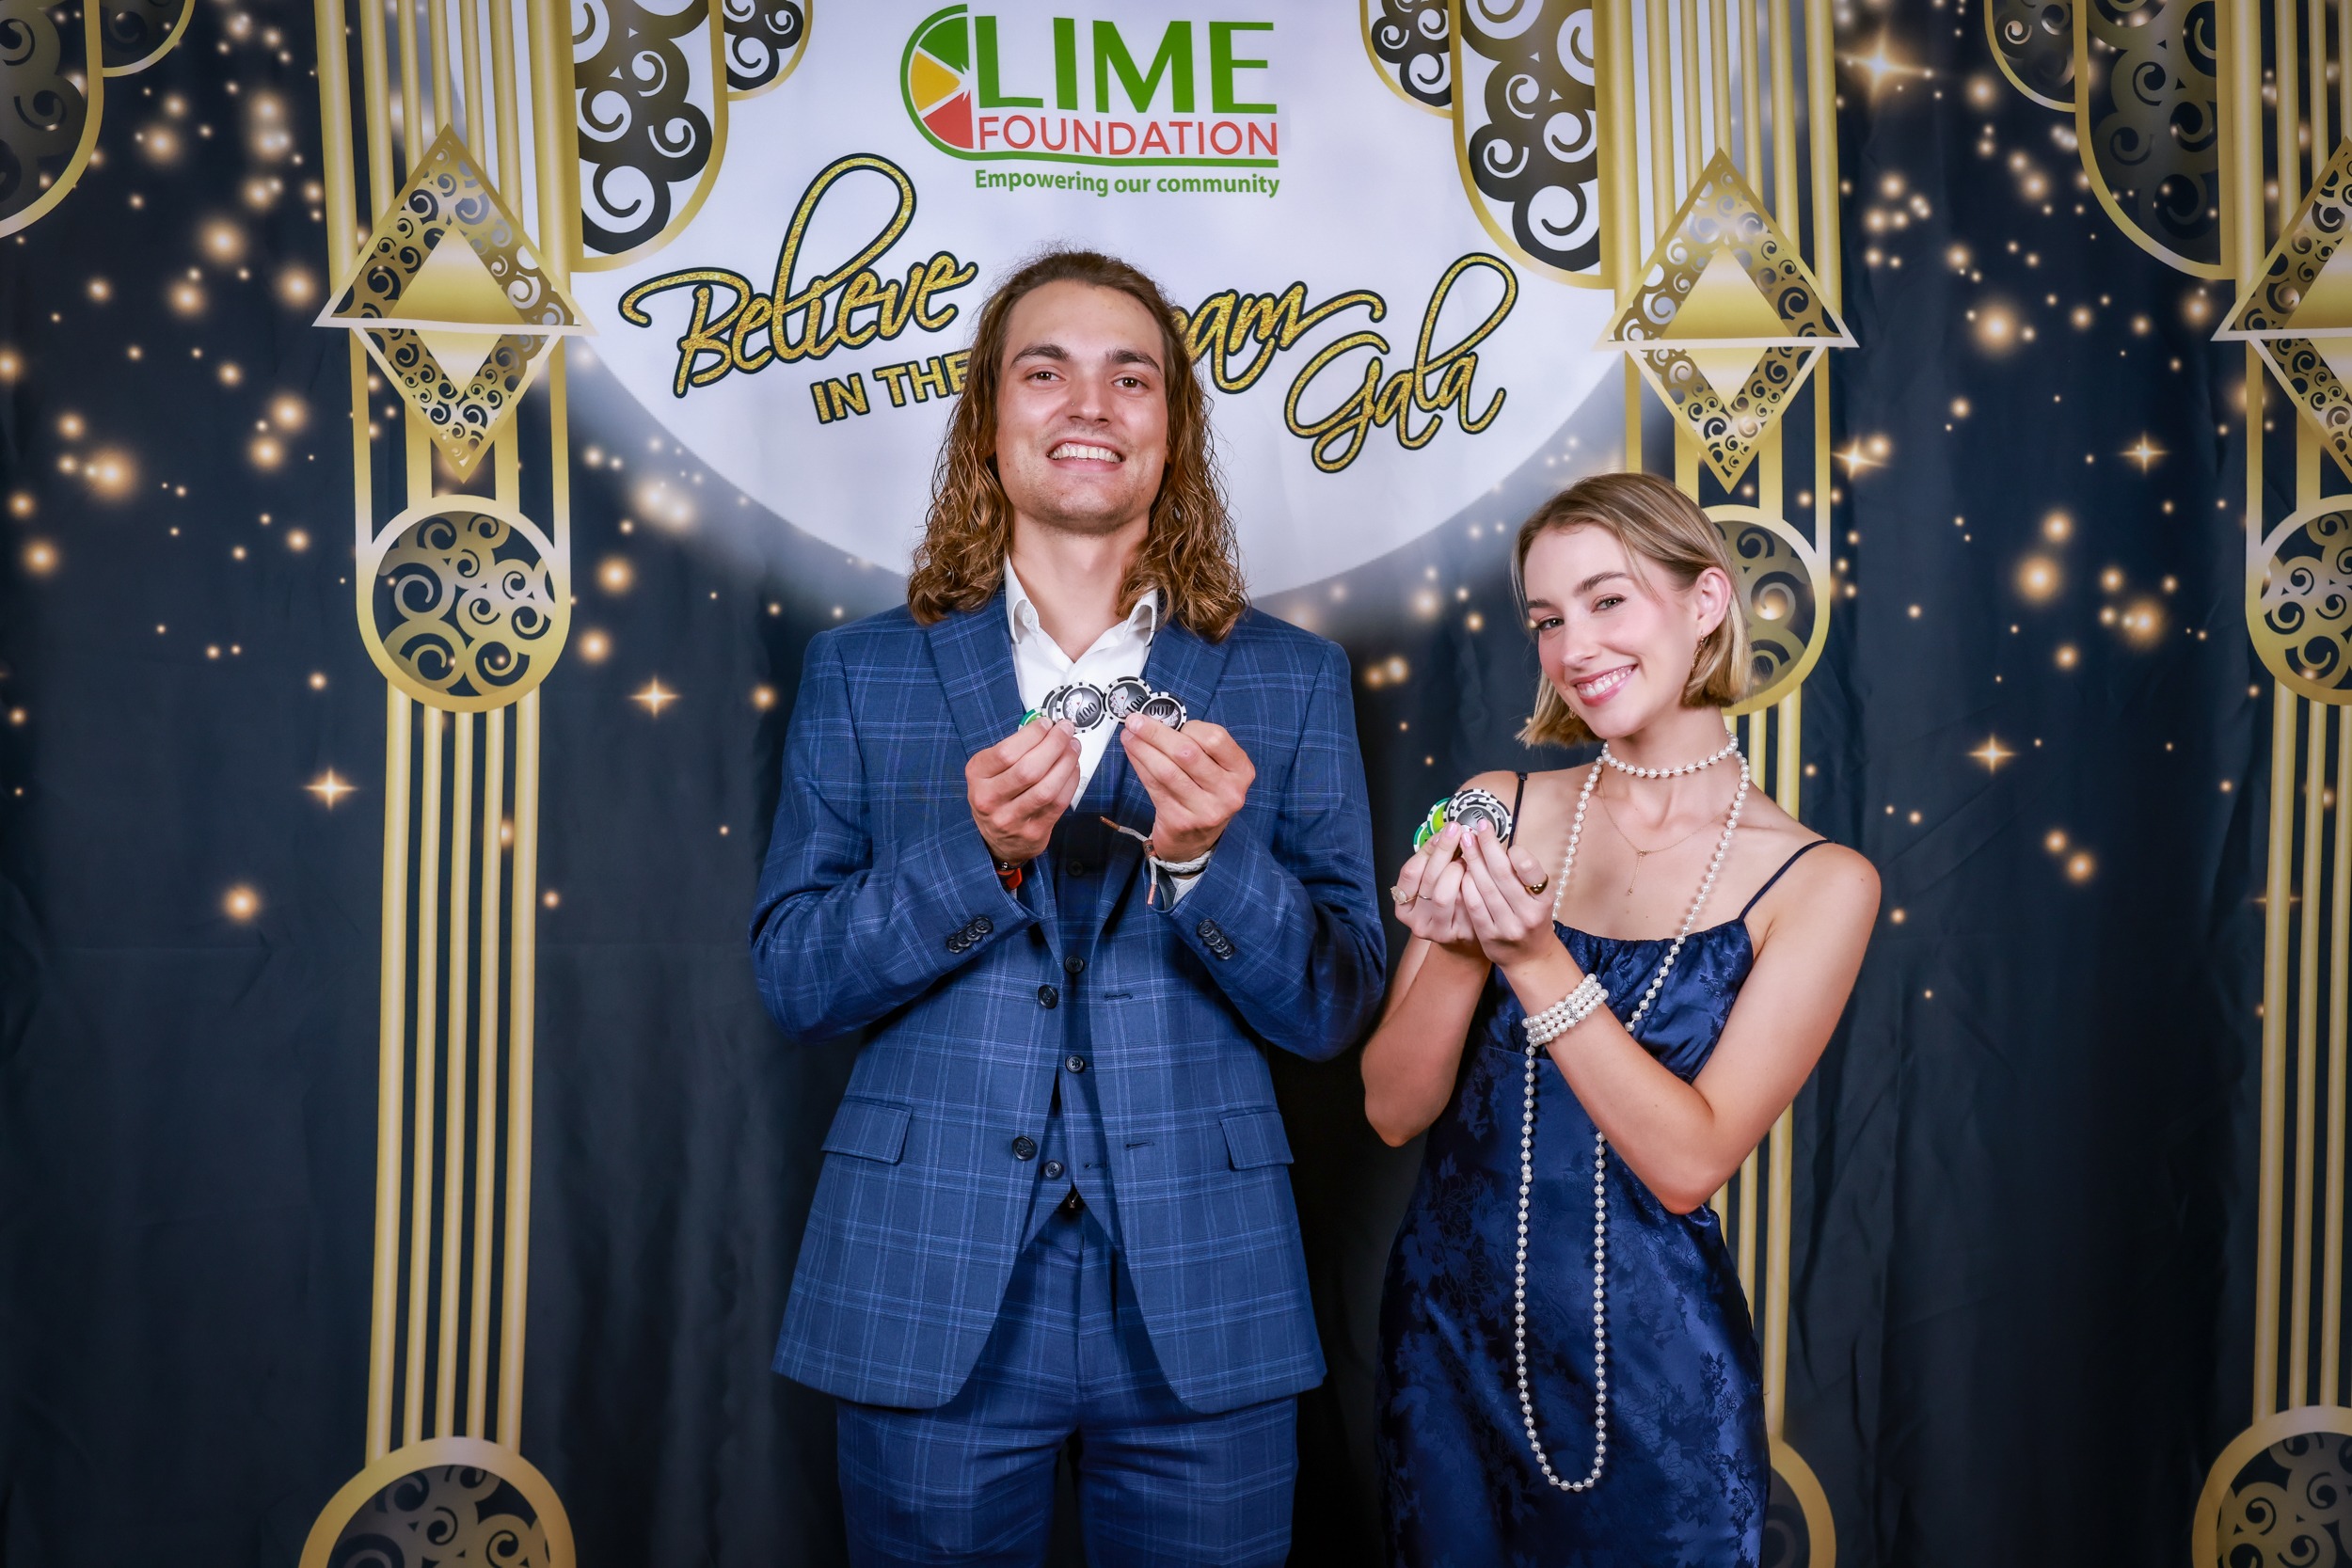 A man and a woman pose for a photo at a party hosted by The LIME Foundation of Santa Rosa, a Sonoma County Non-Profit Organization.